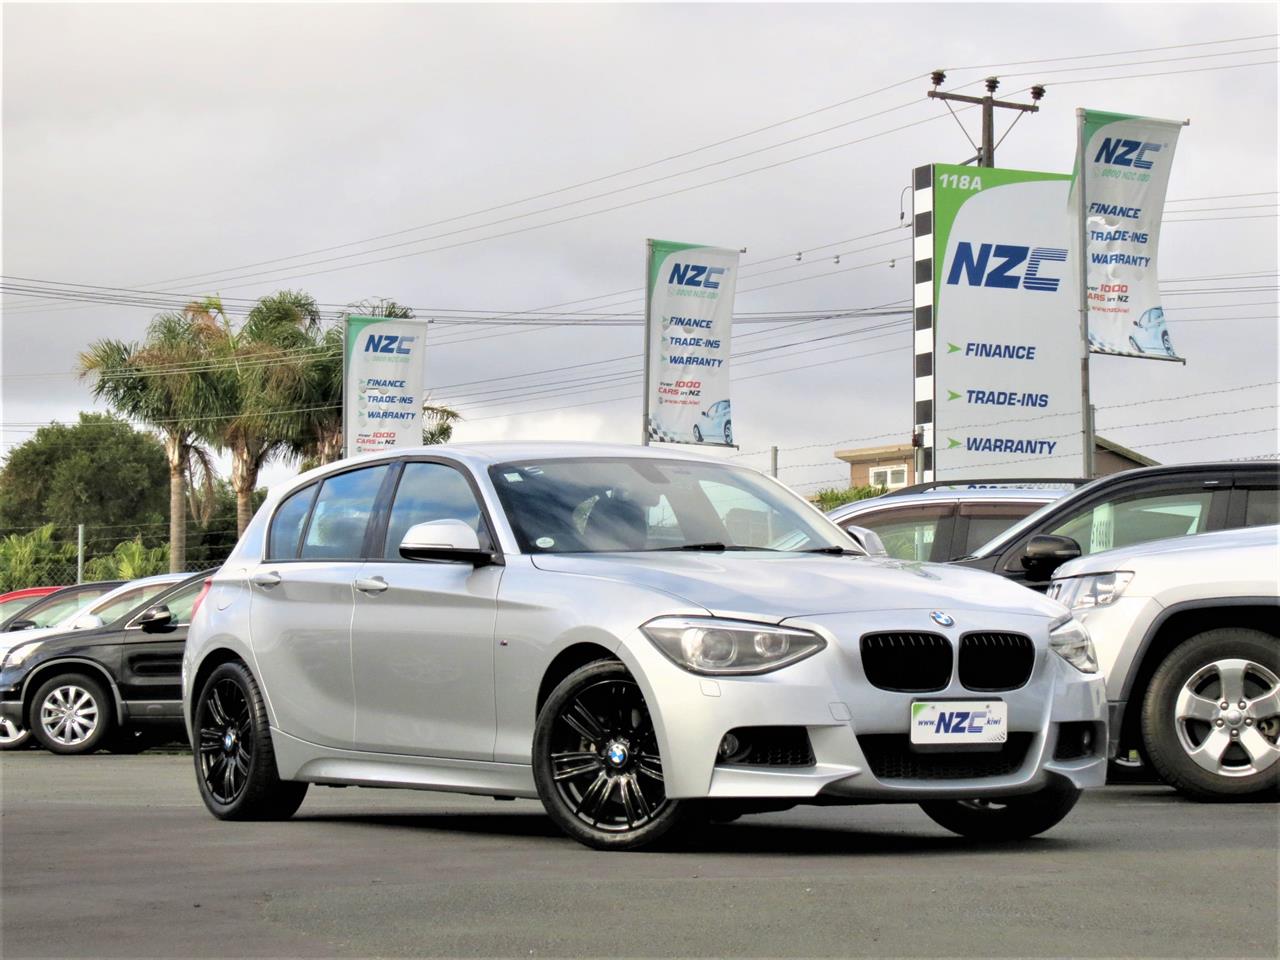 NZC 2014 BMW 116i just arrived to Auckland